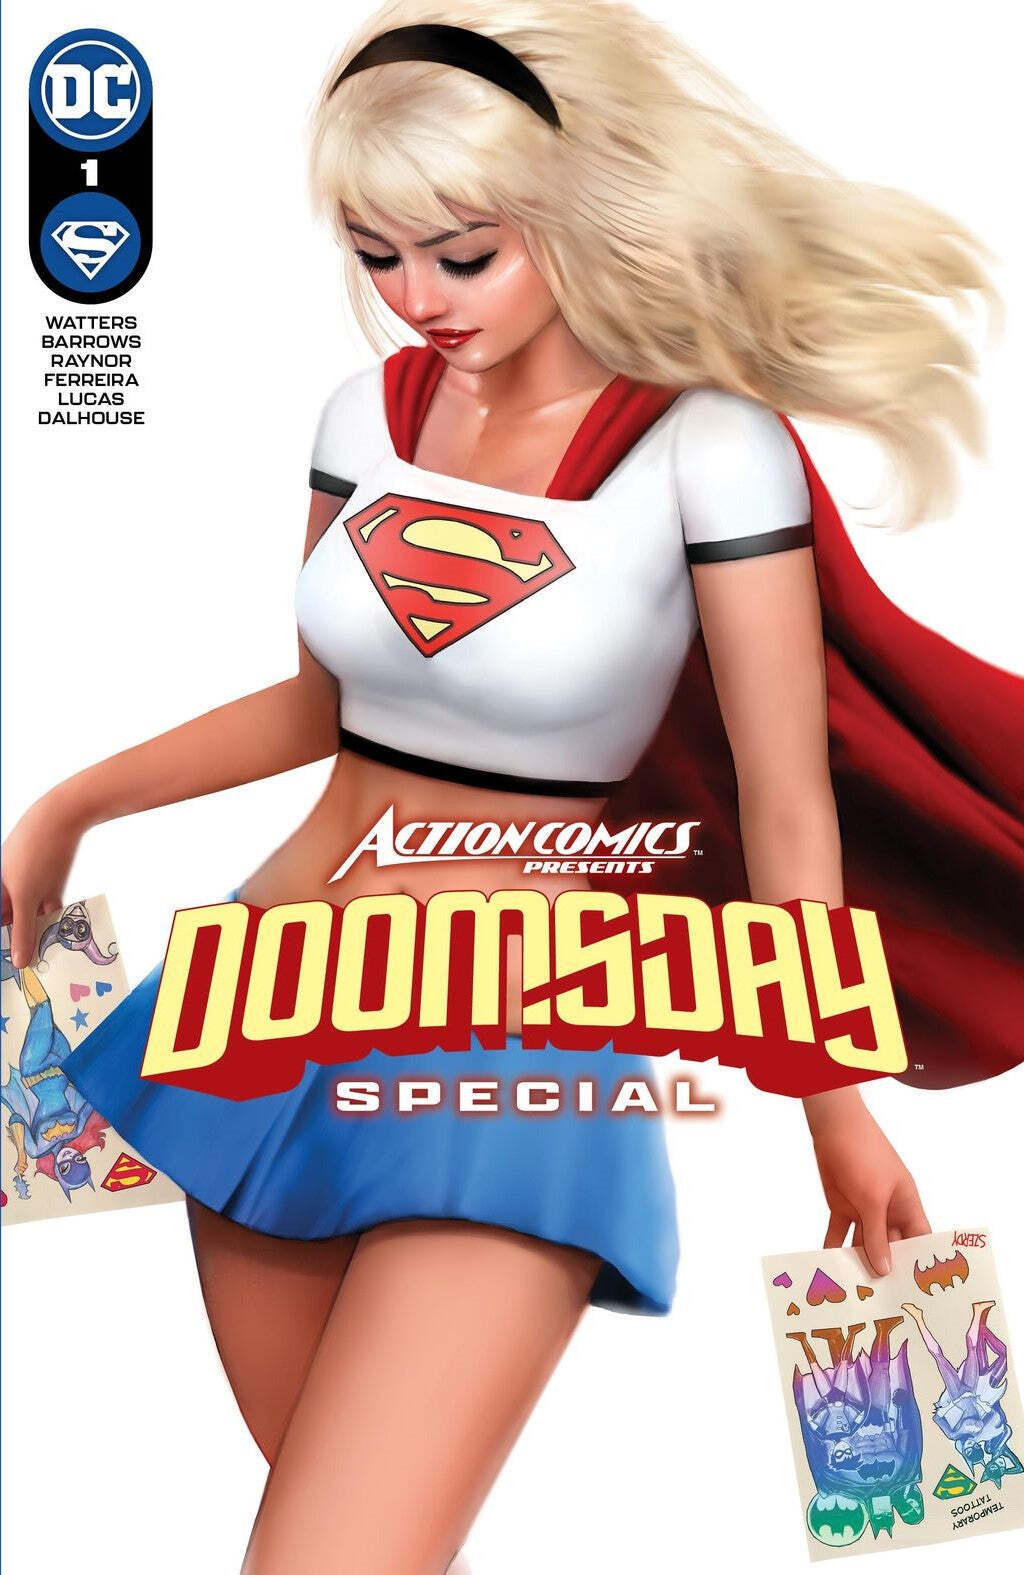 ACTION COMICS PRESENTS DOOMSDAY SPECIAL #1 (ONE SHOT) NATHAN SZERDY (616) EXCLUS